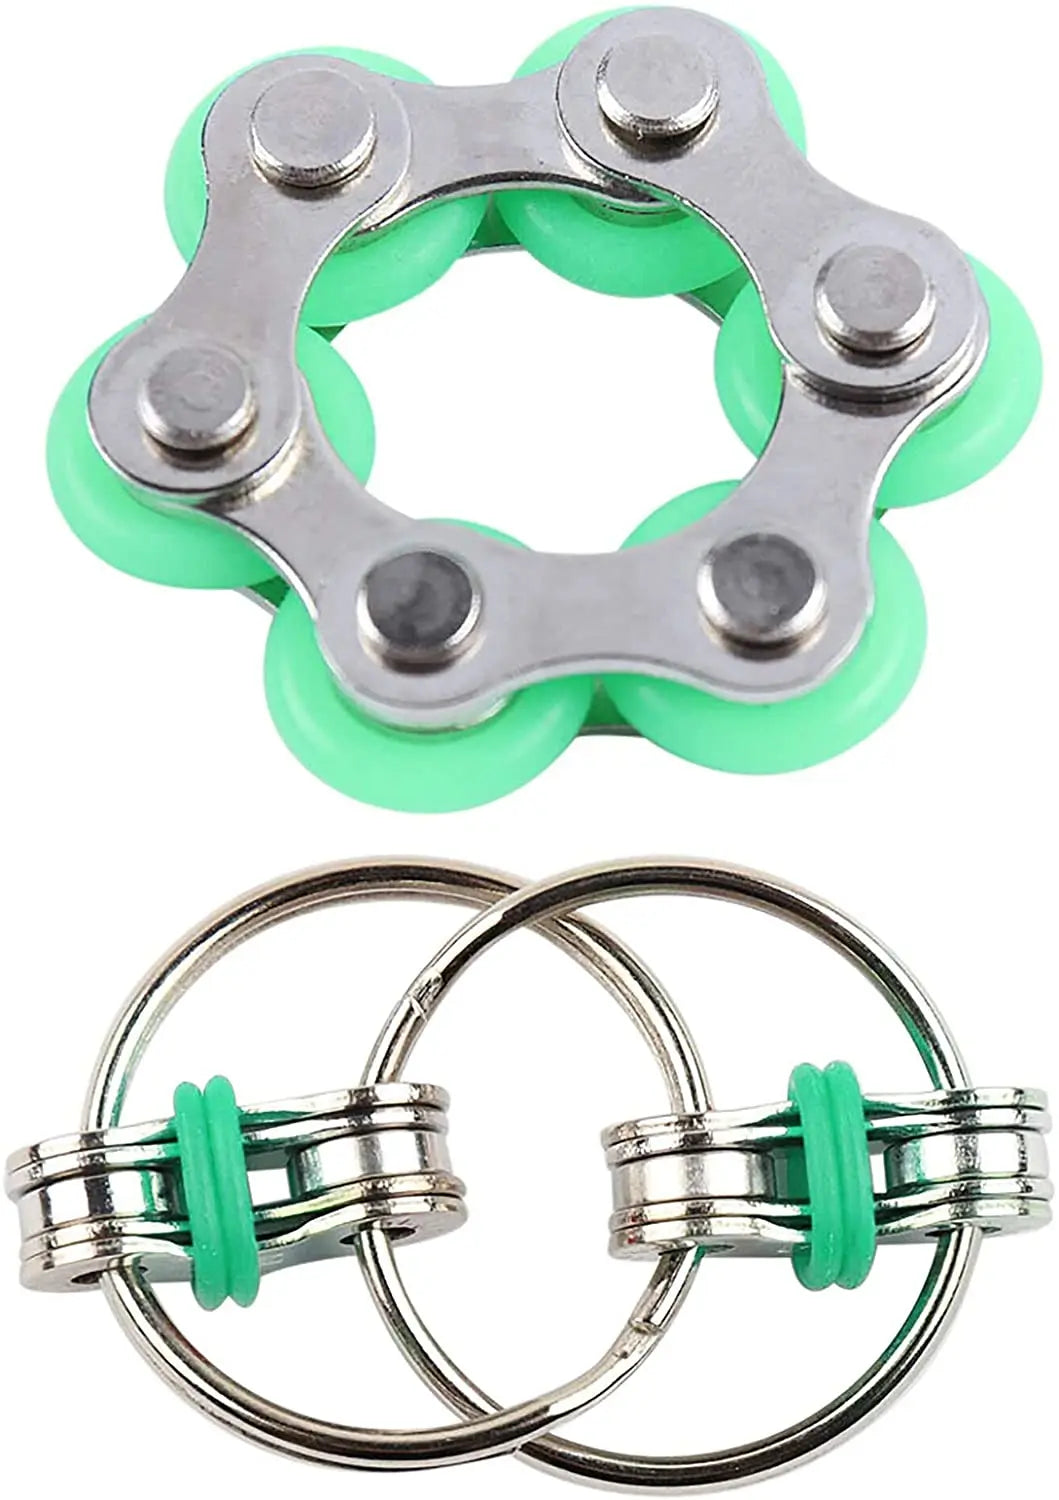 1/2pcs Anxiety Ring Bike Chain Finger Fidget Toy For Autism ADHD ADD Stress Relief in Classroom Office School Sensory Toys